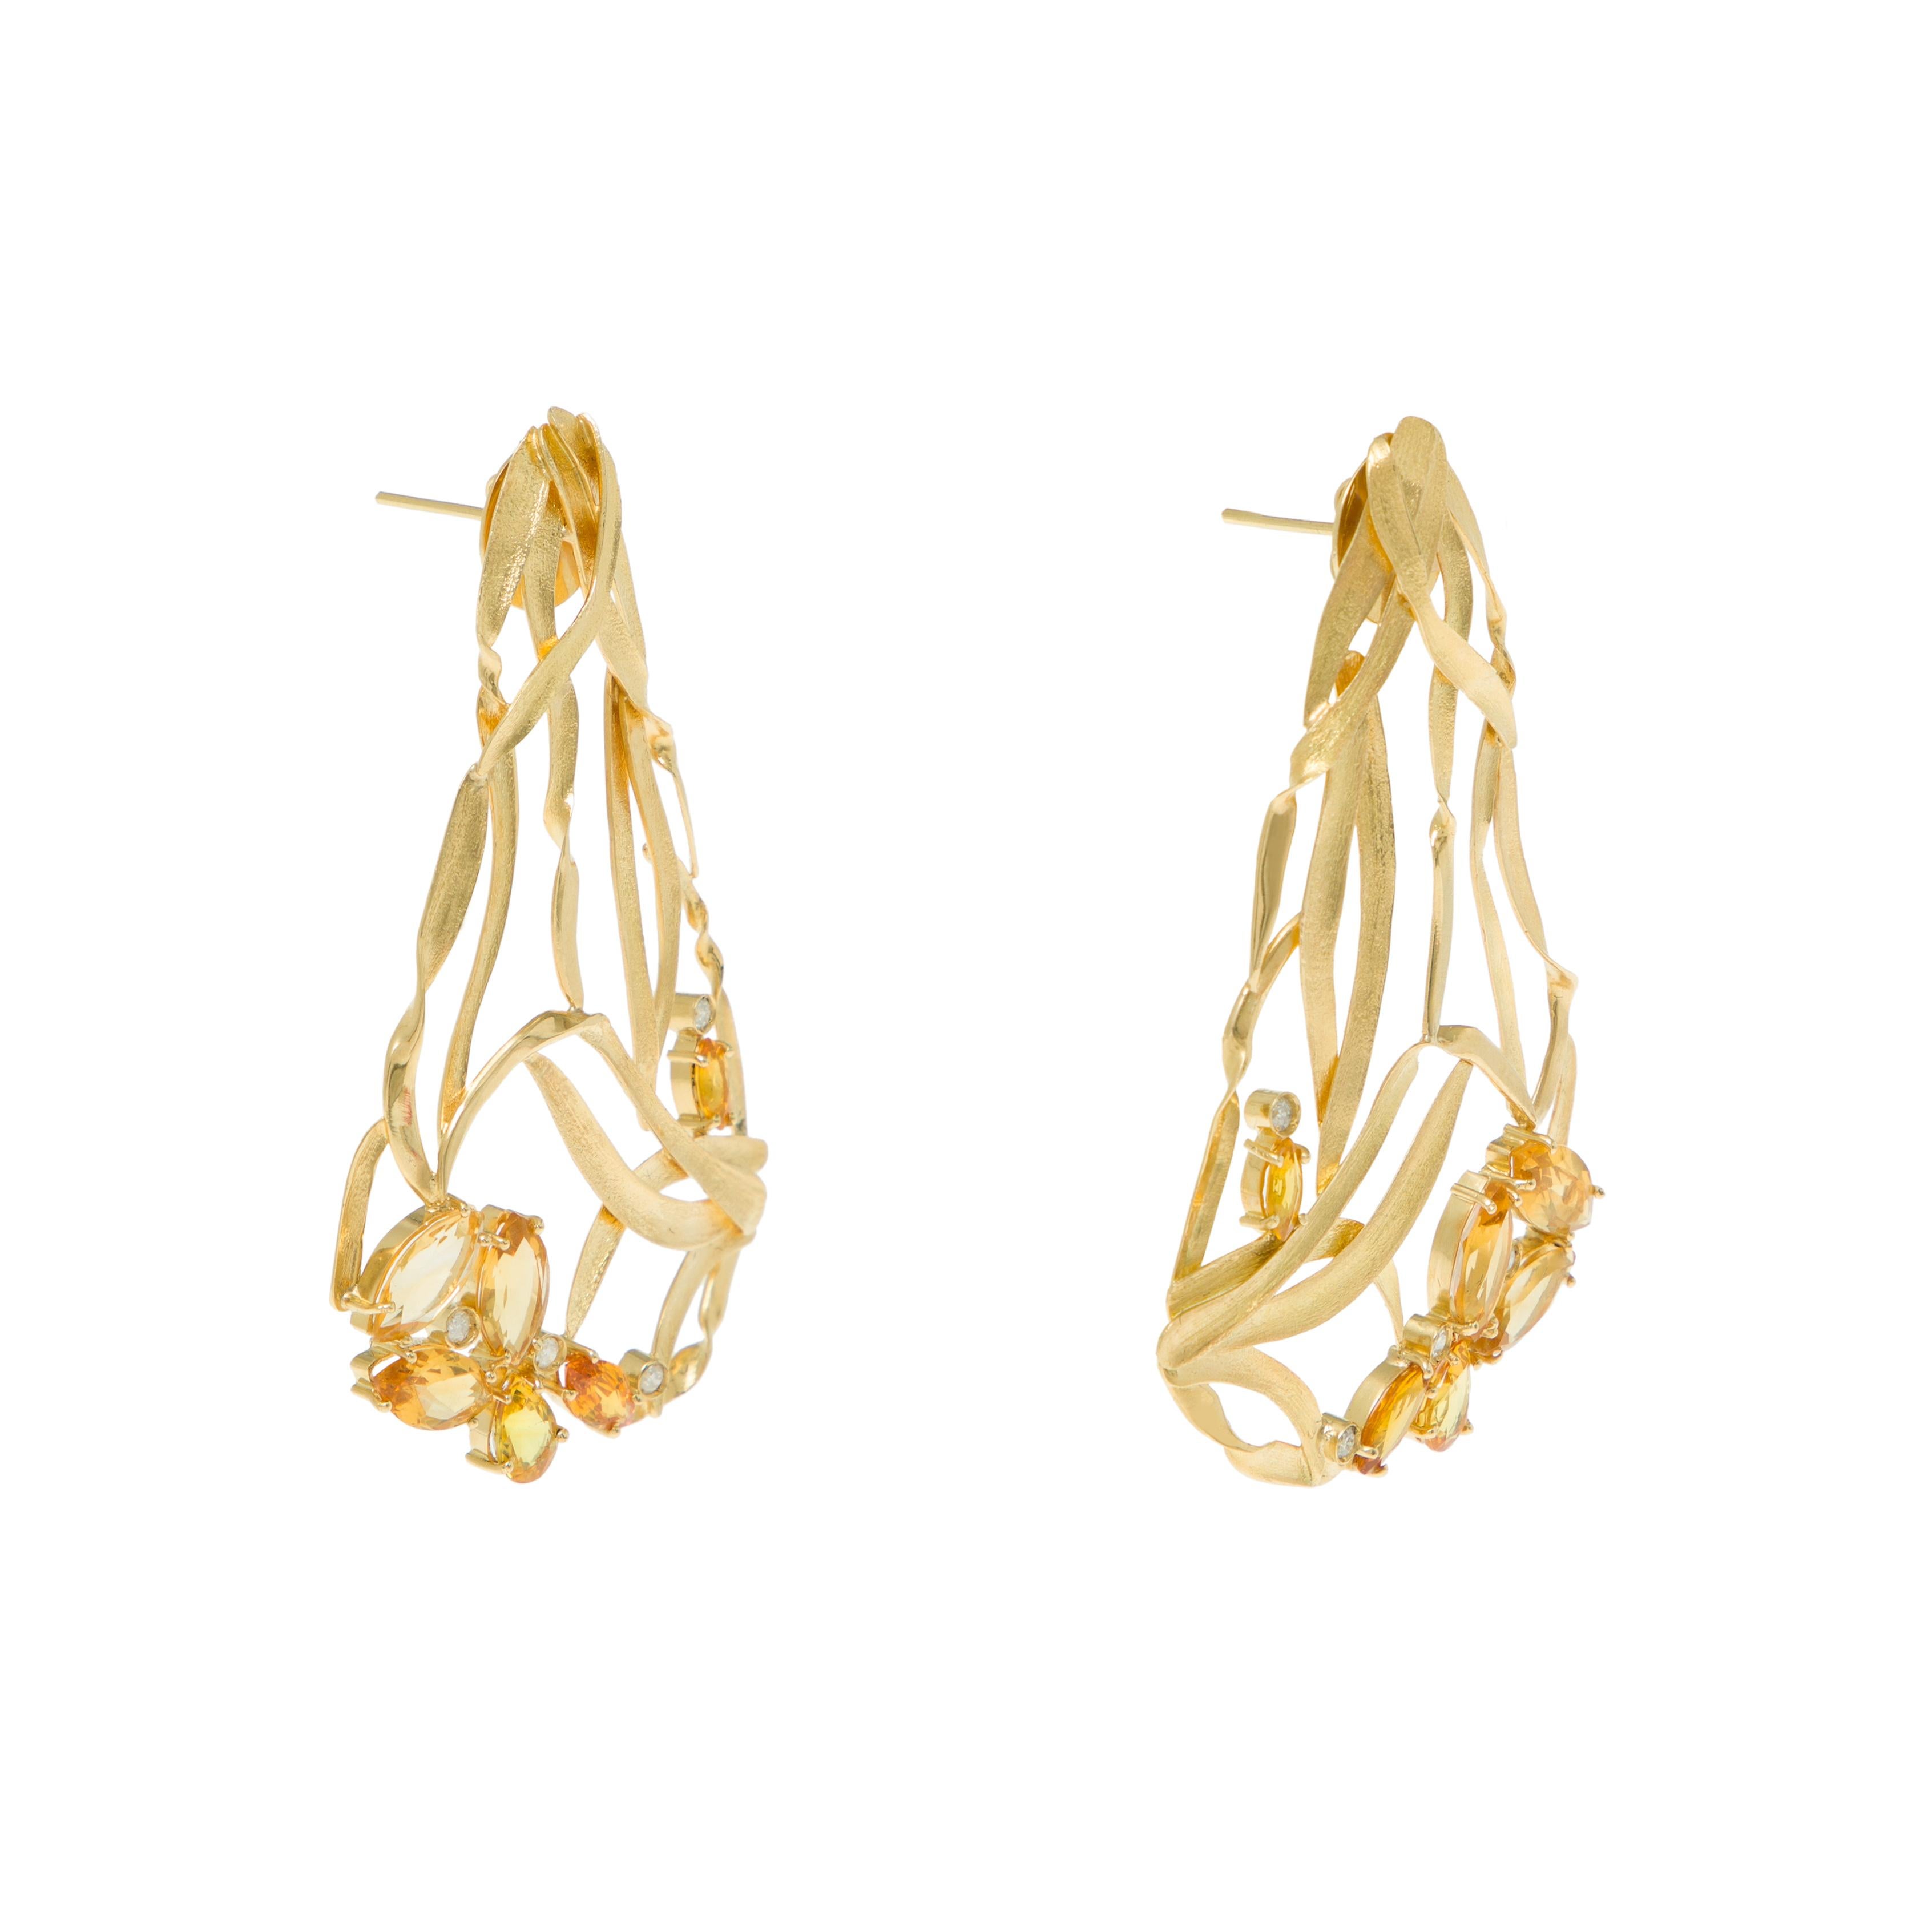 Earrings
Gold 18K
Yellow Sapphires, Citrines and Diamonds
Handmade, bright polished finished, matte finish and prong setting

A' Design Award (2020-2021) special mention

The soft hues of the yellow gemstones mimic Van Gogh’s flowers.  Diamonds give